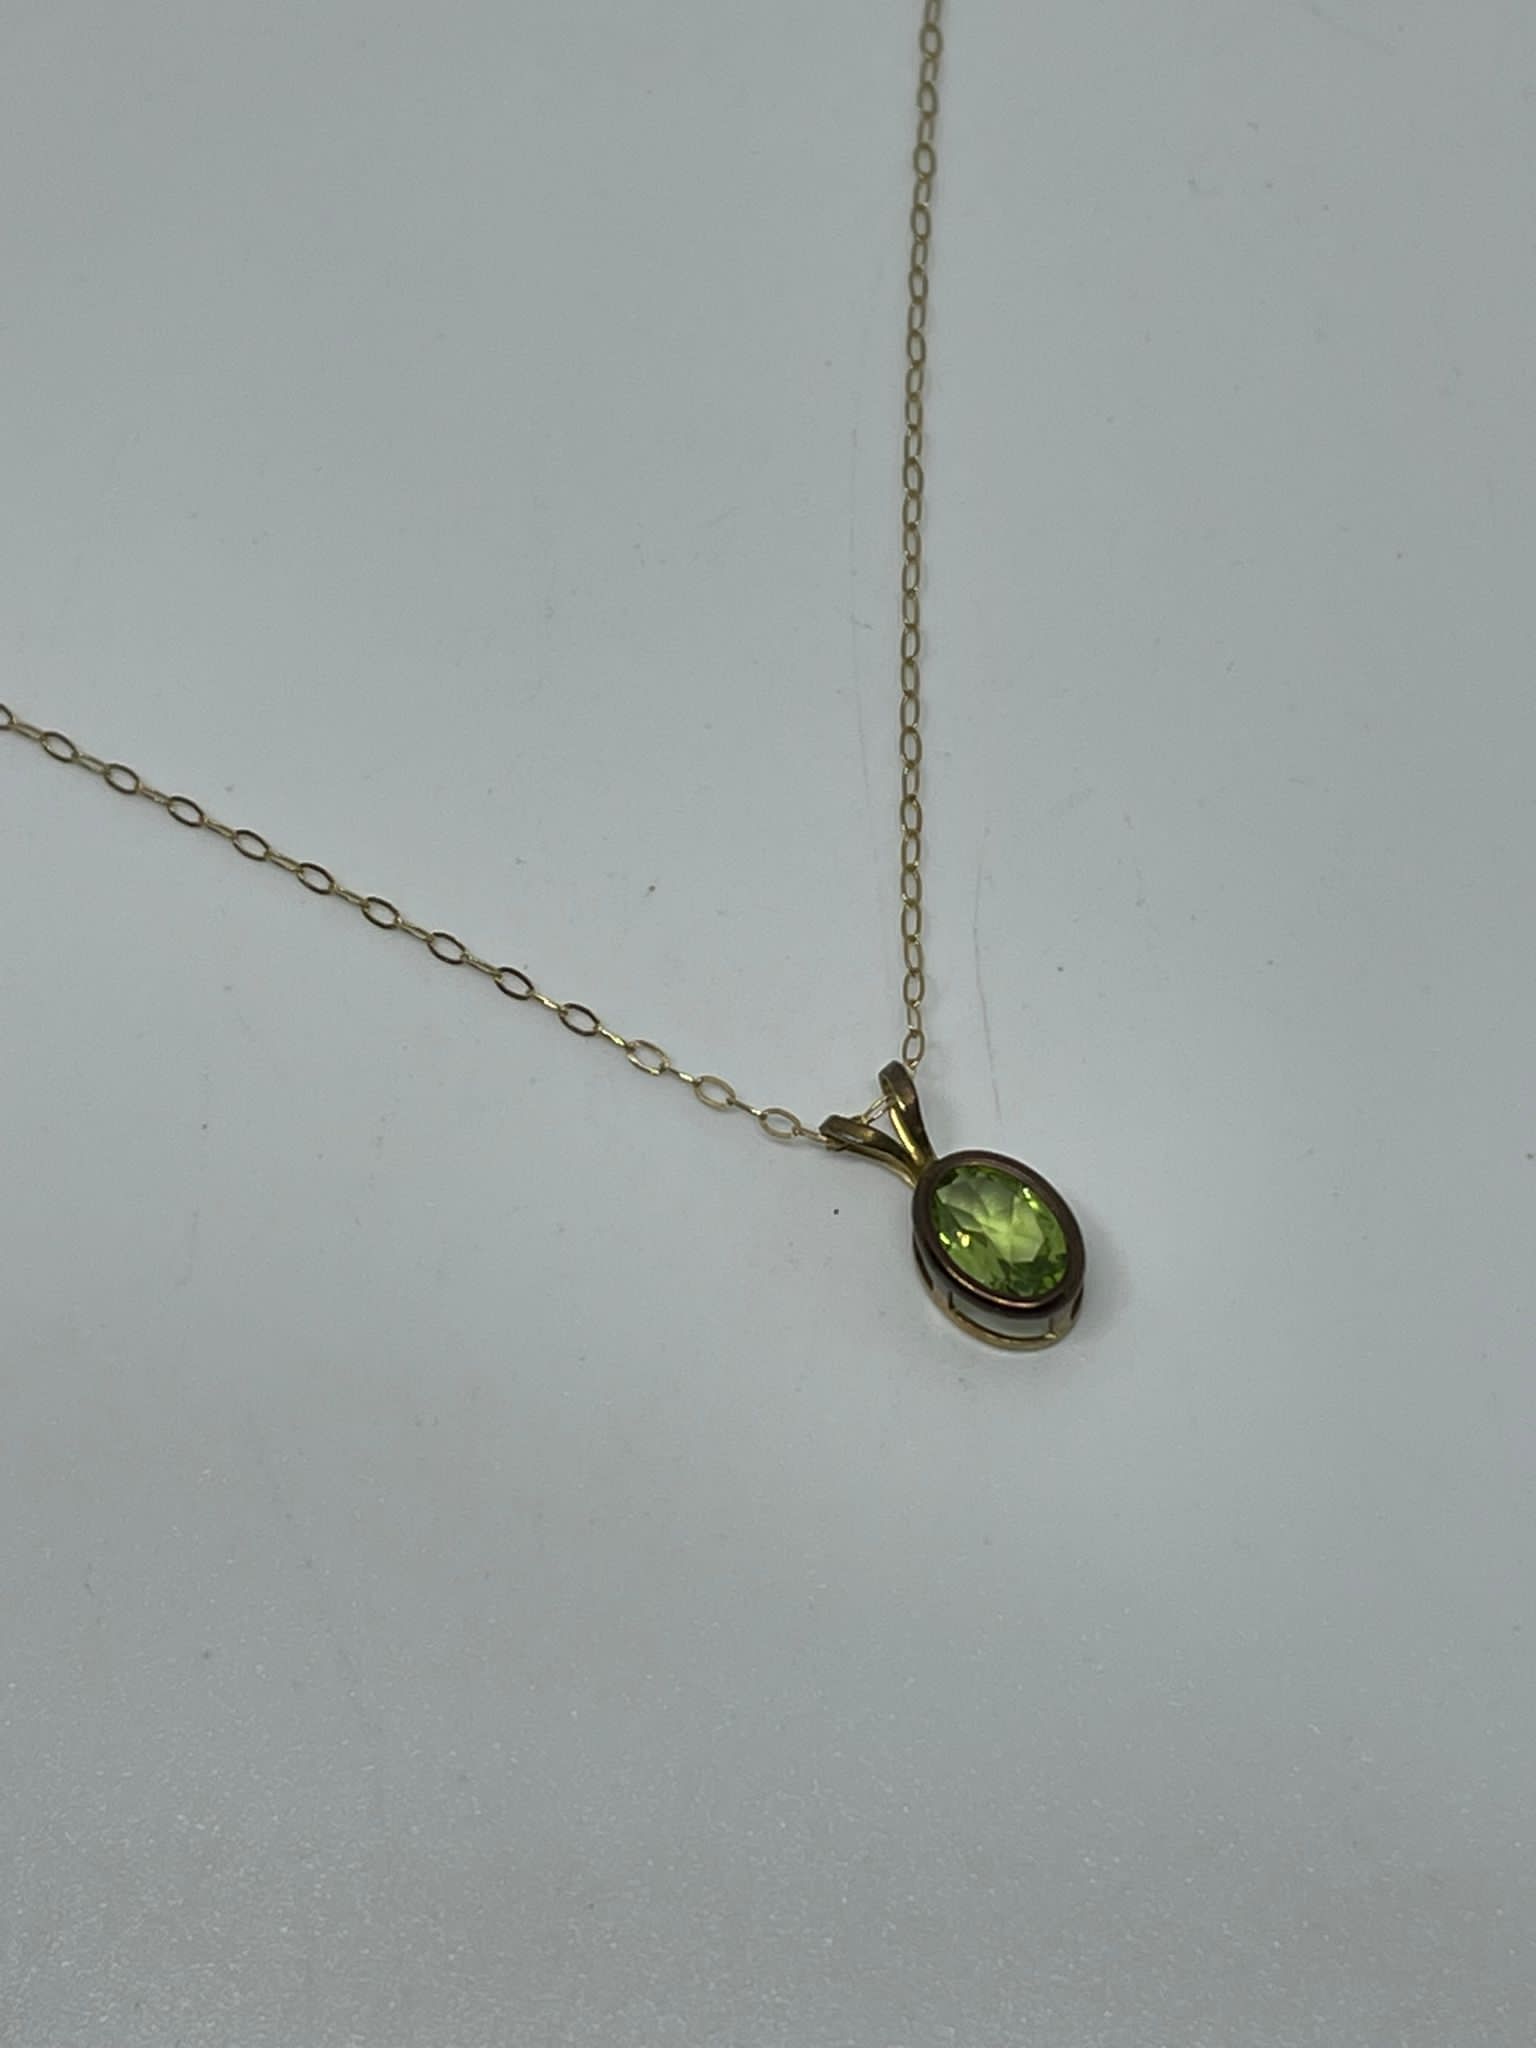 9 ct gold peridot pendant and chain - Image 2 of 2